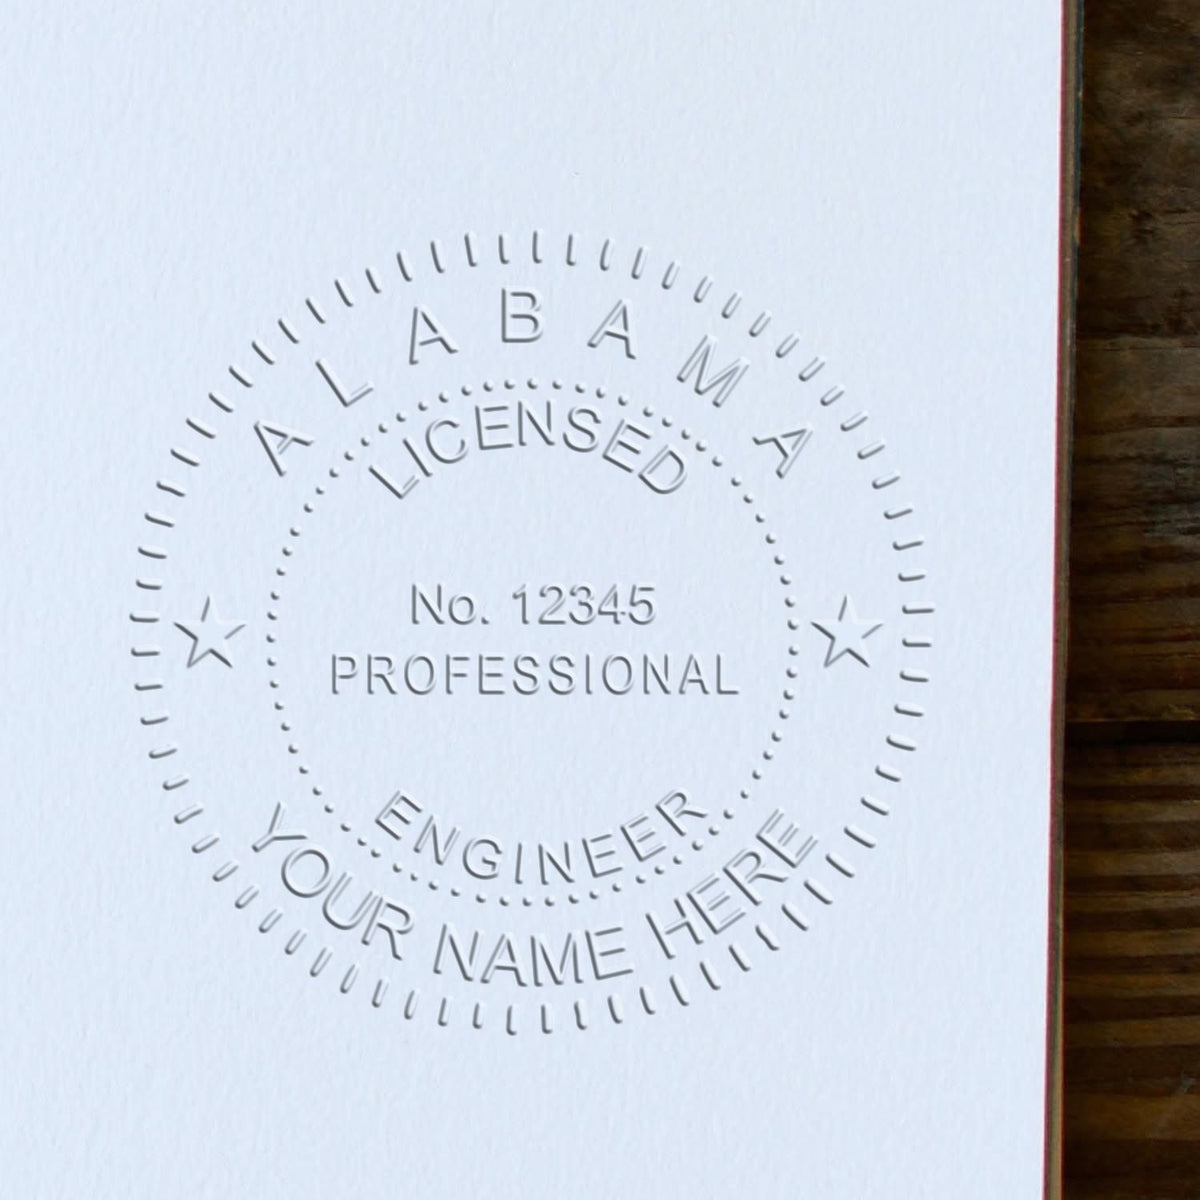 The Heavy Duty Cast Iron Alabama Engineer Seal Embosser stamp impression comes to life with a crisp, detailed photo on paper - showcasing true professional quality.